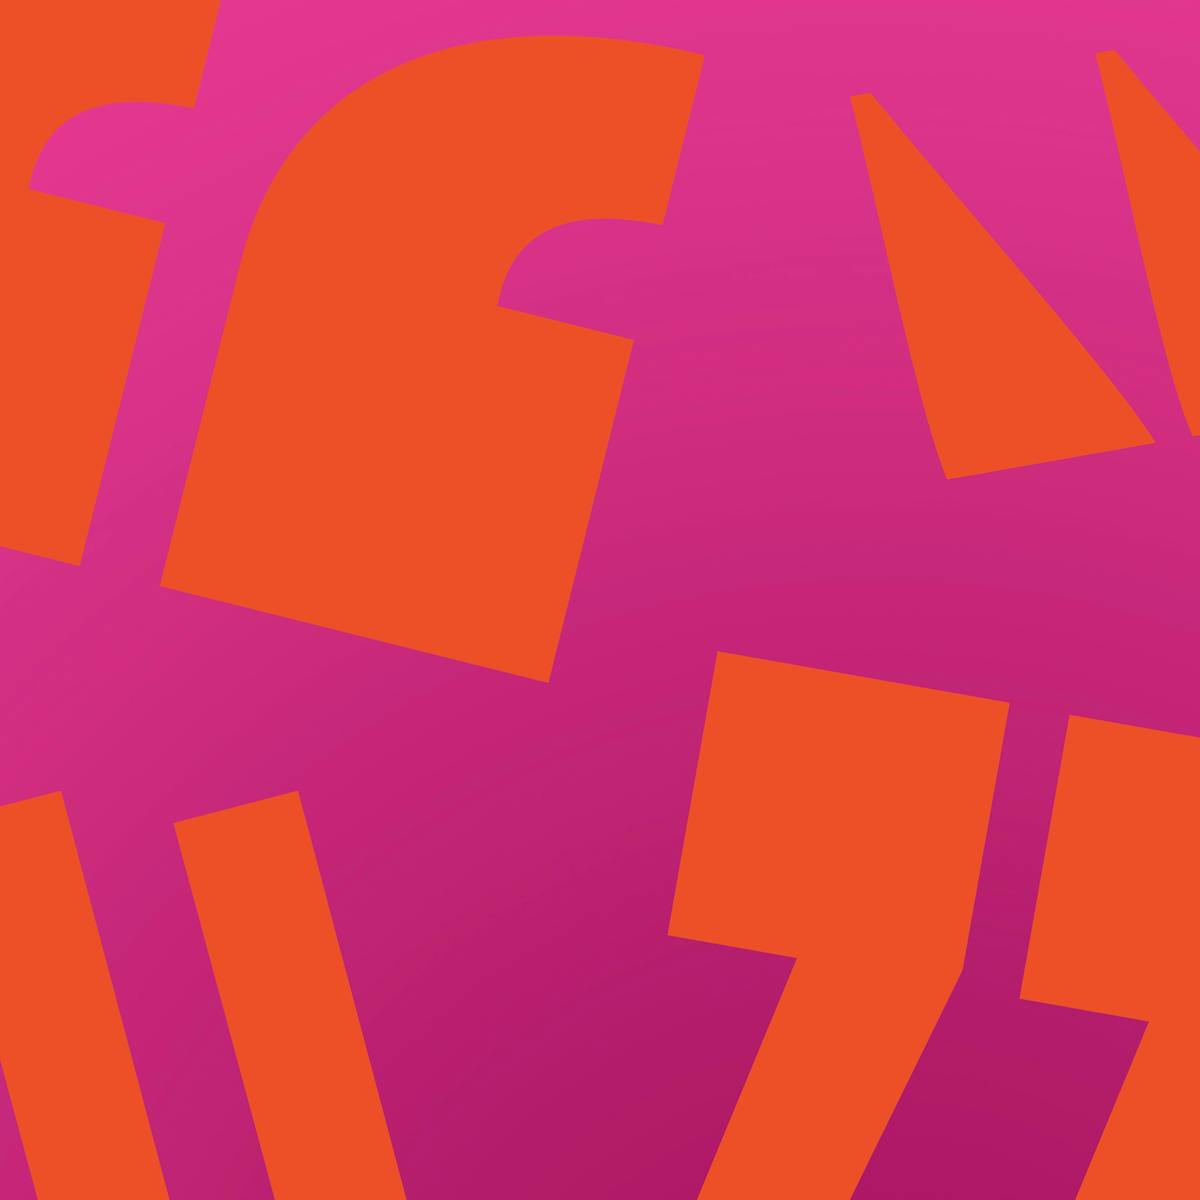 A pink graphic with four sets of orange quotation marks.